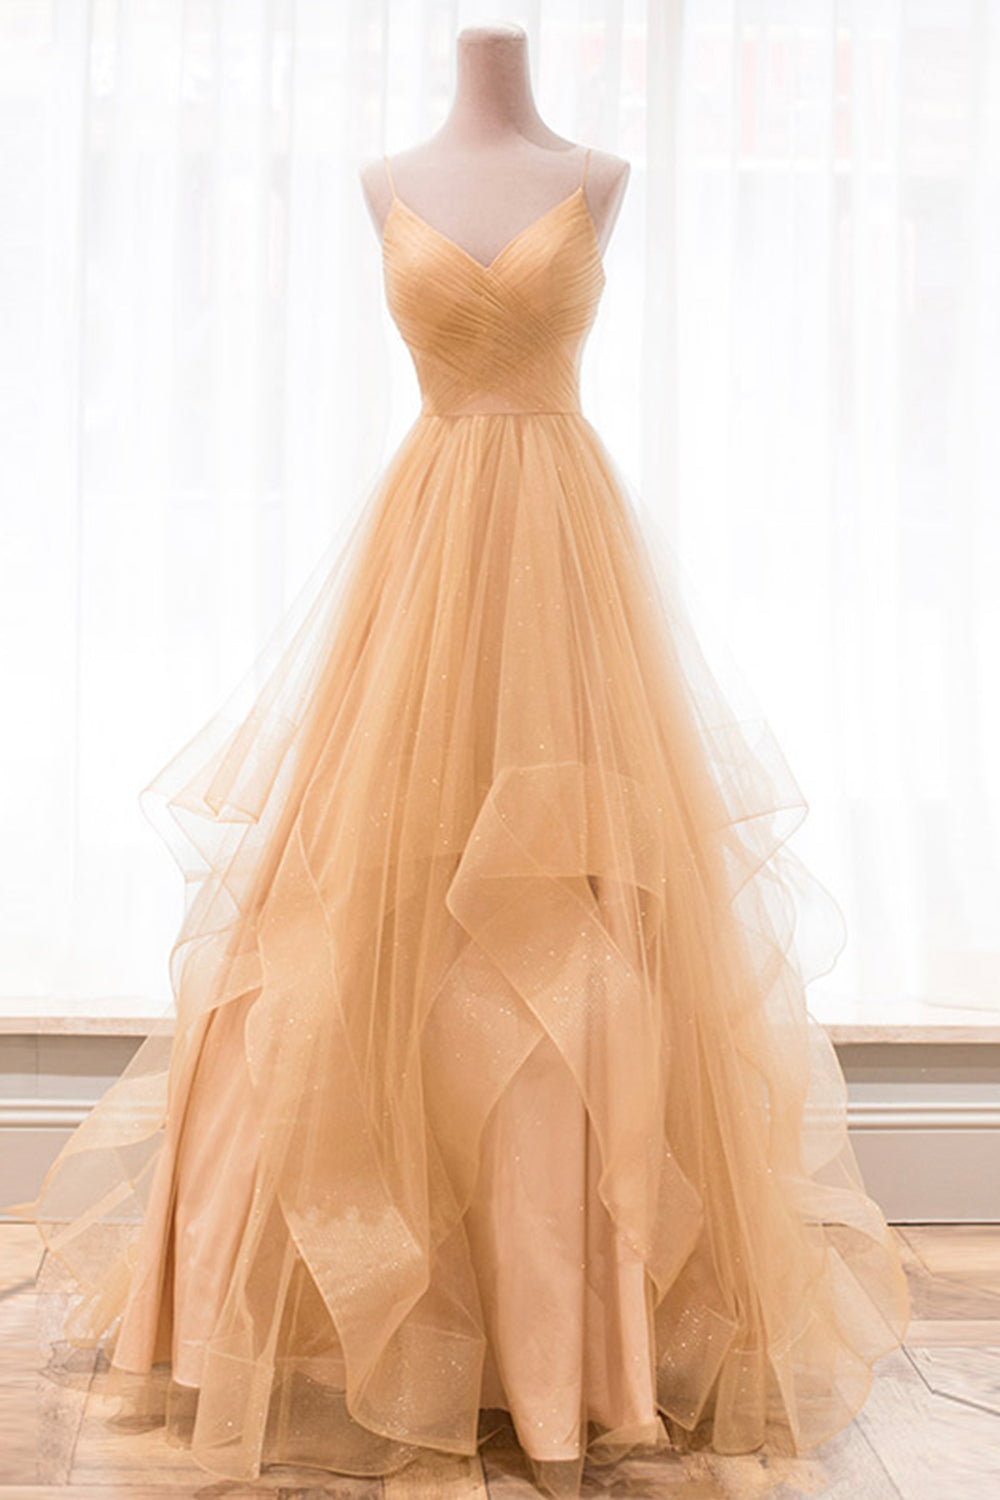 Gold V-Neck Tulle Long Prom Dress Outfits For Girls, A-Line Evening Dress